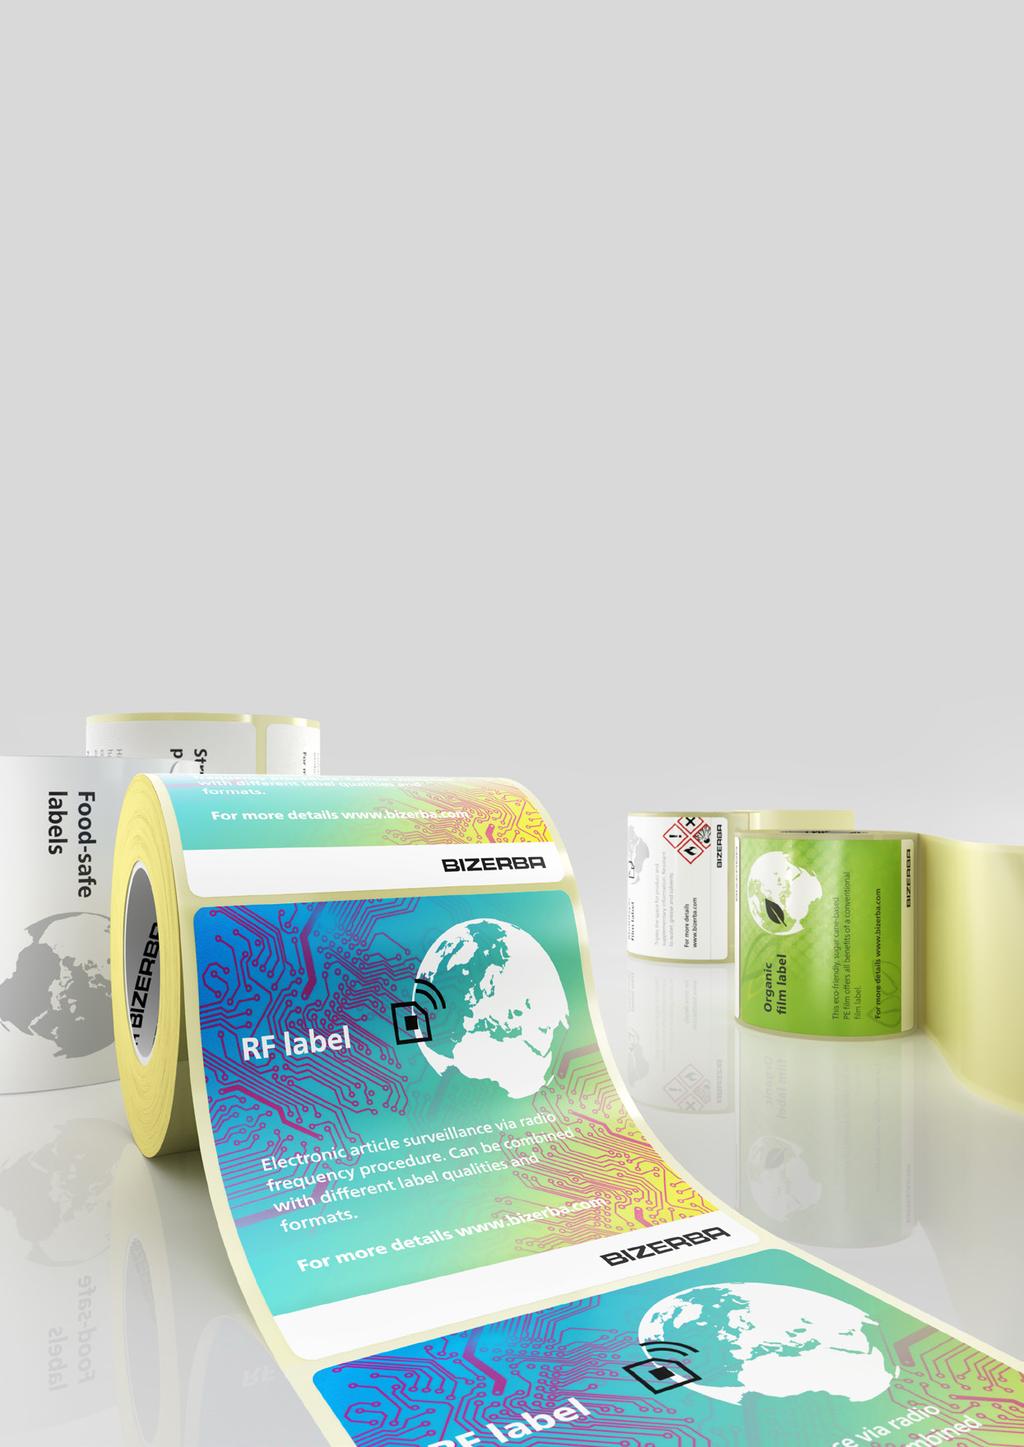 Broad spectrum, combinable with color print and hot embossing. For more details www.bizerba.